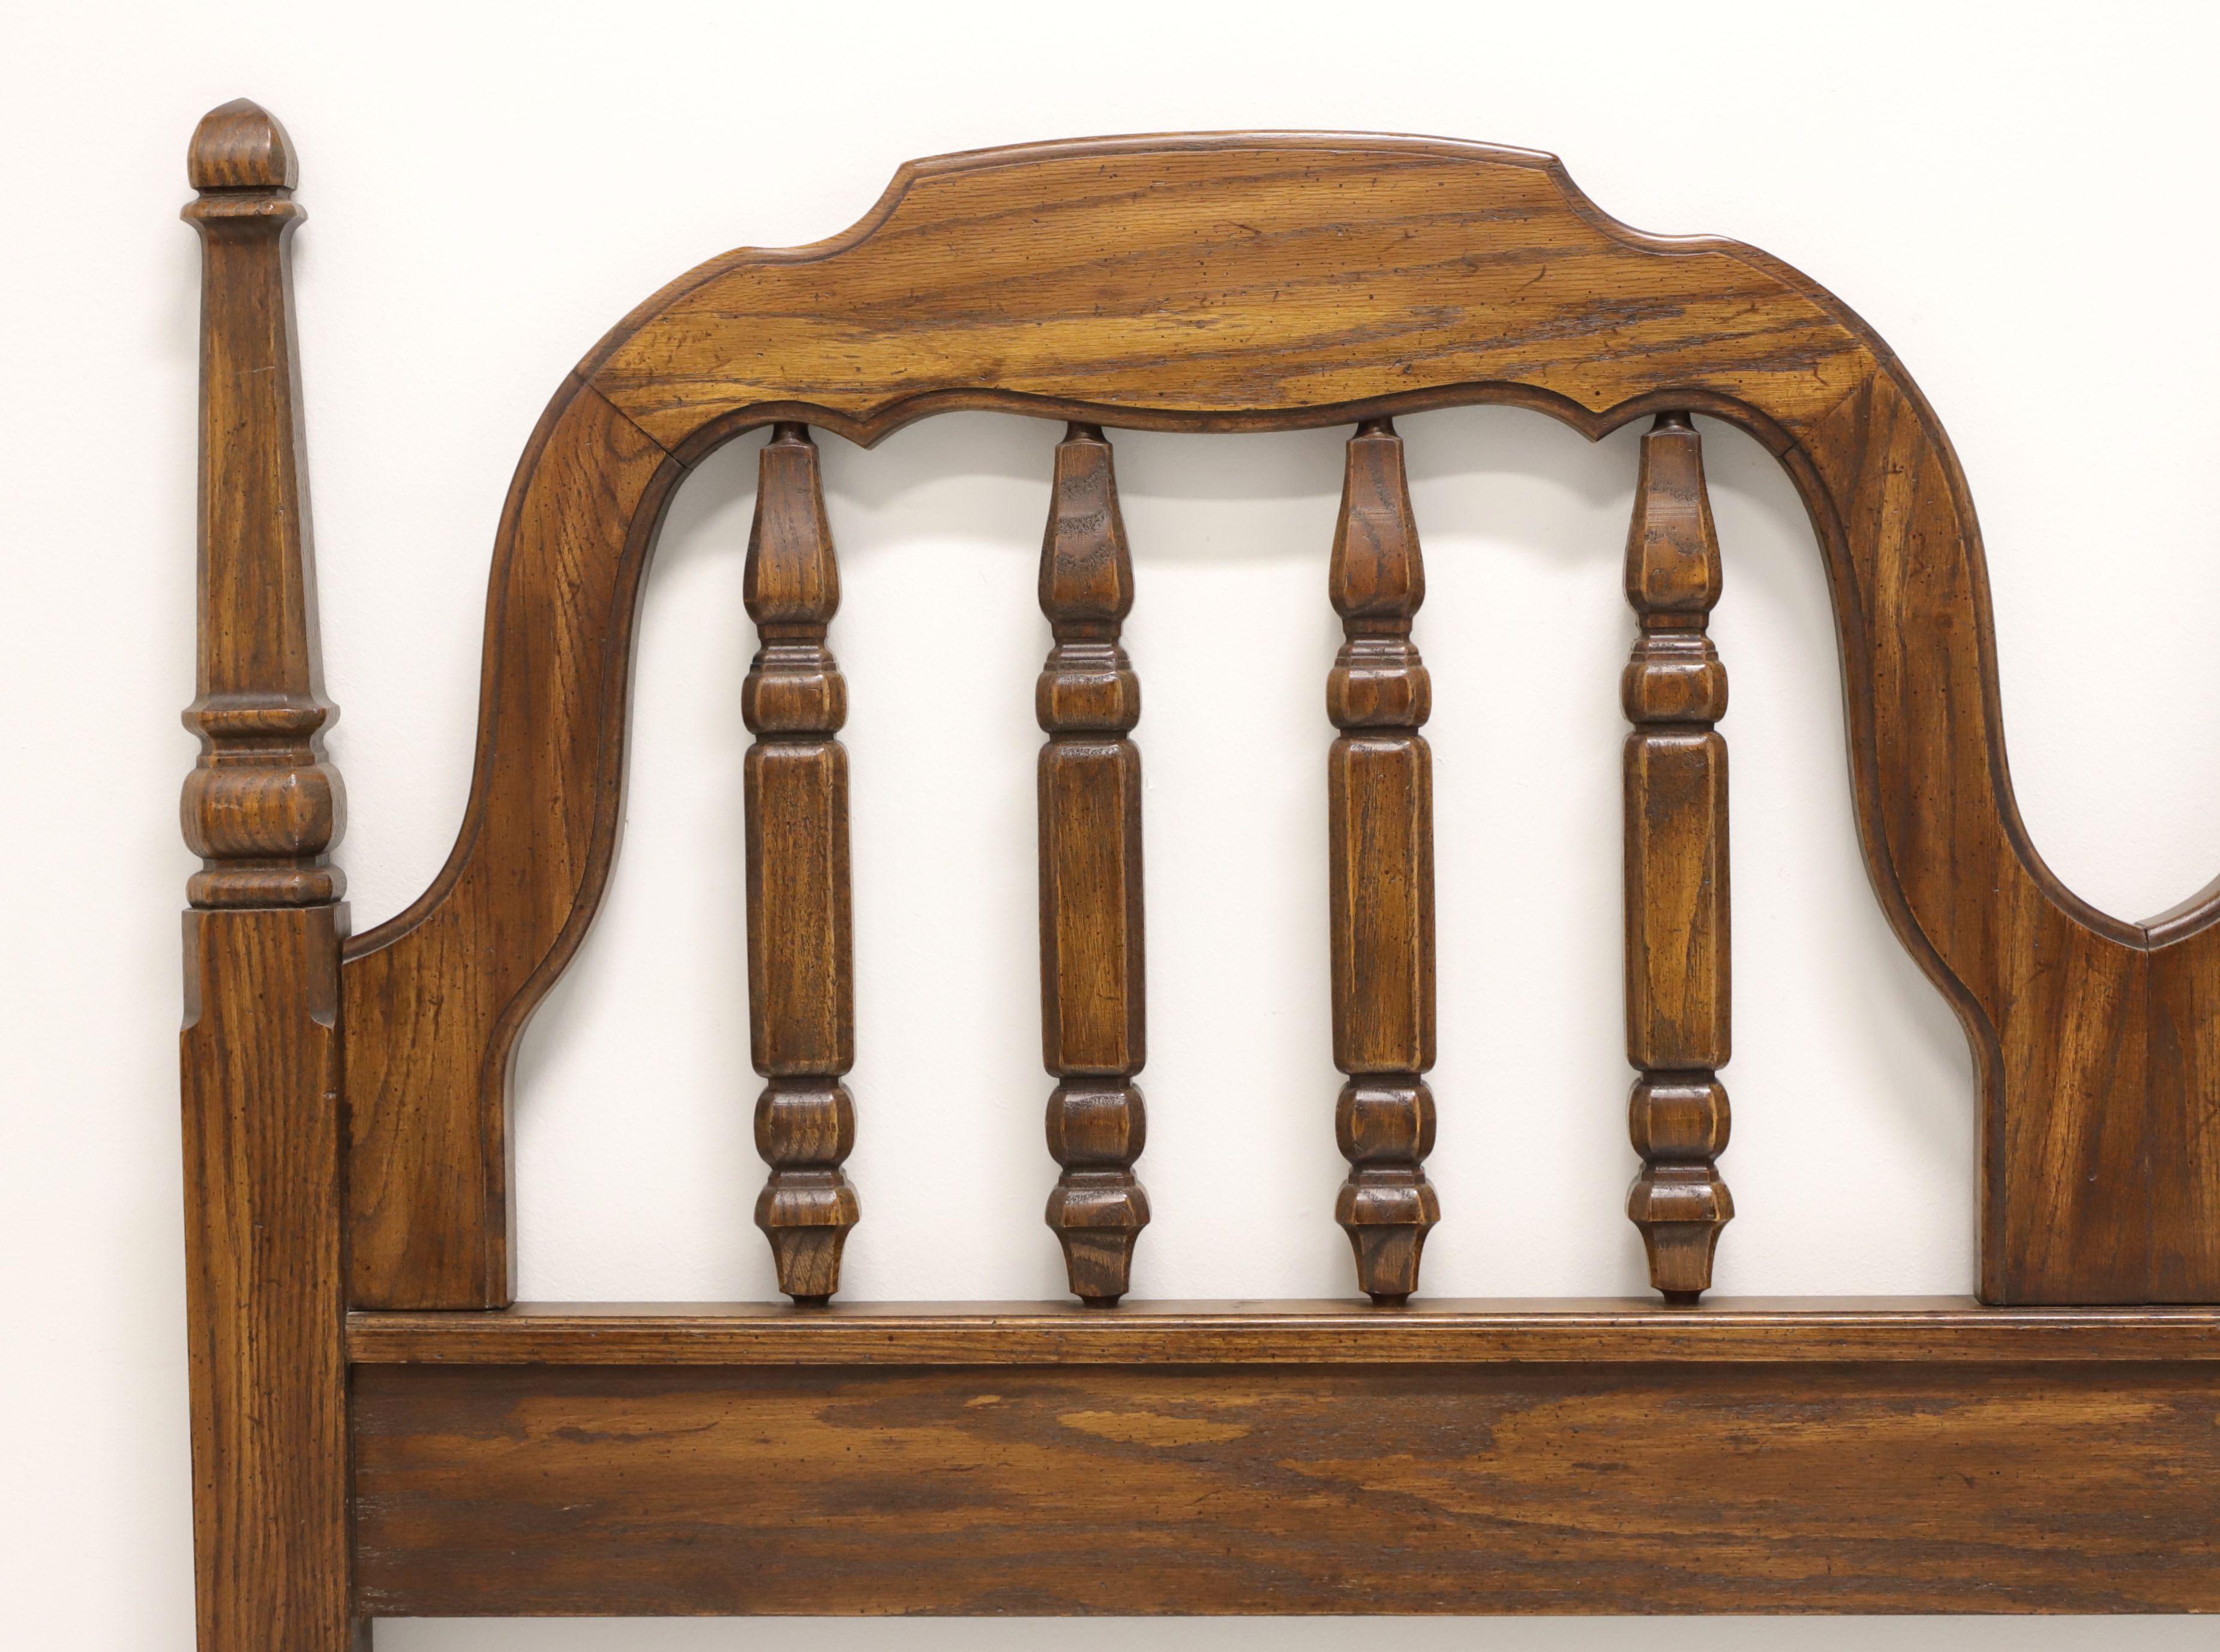 A Spanish Mediterranean style queen Size headboard by Thomasville, from their Segovia Collection. Solid oak with slightly distressed finish, Dual carved arched top, four decorative open posts within the arches, short carved posts at sides, and